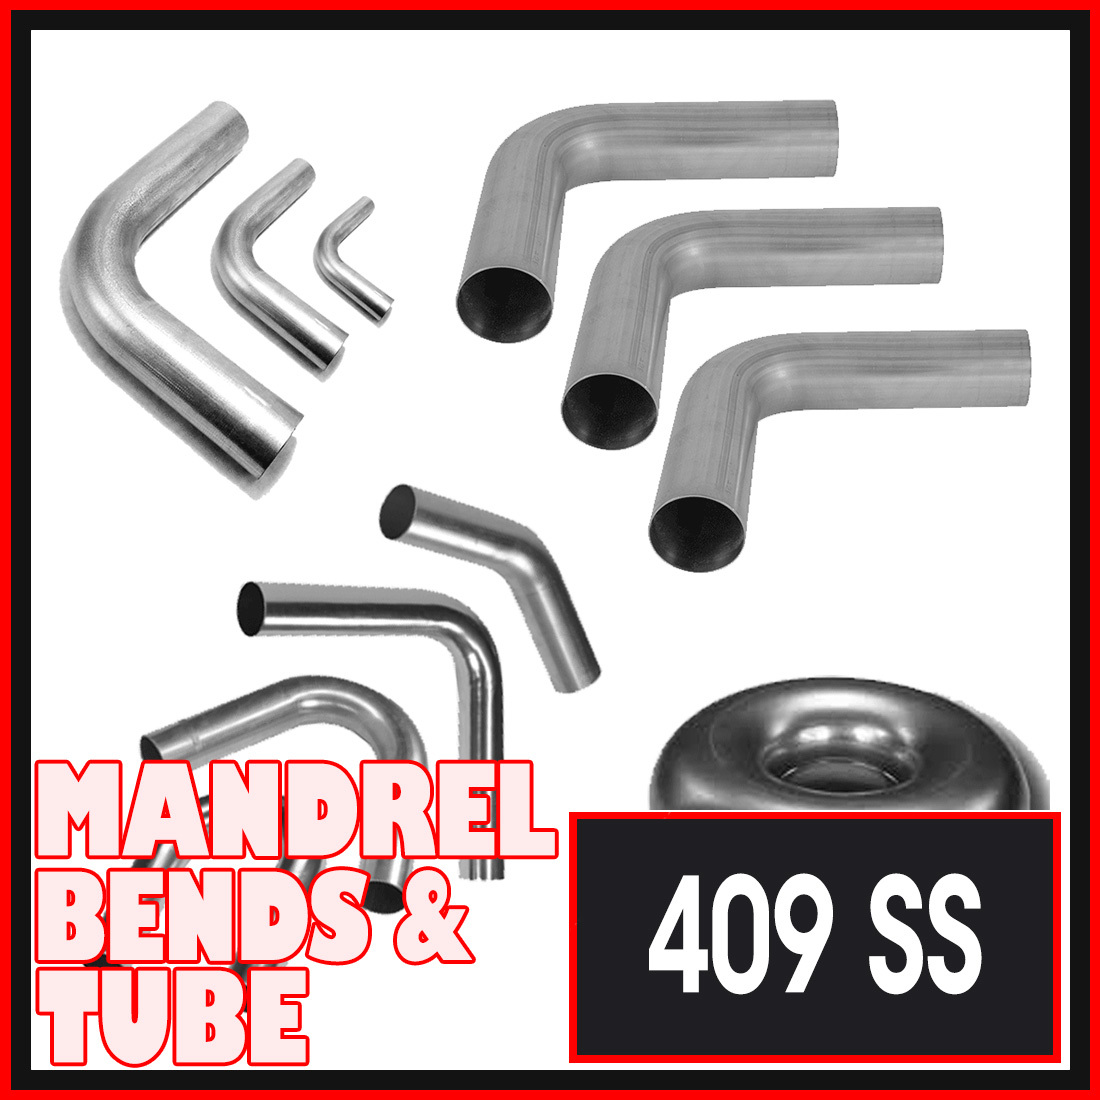 2 1/2" 409 Stainless Steel Mandrel Bends and Exhaust Pipe image